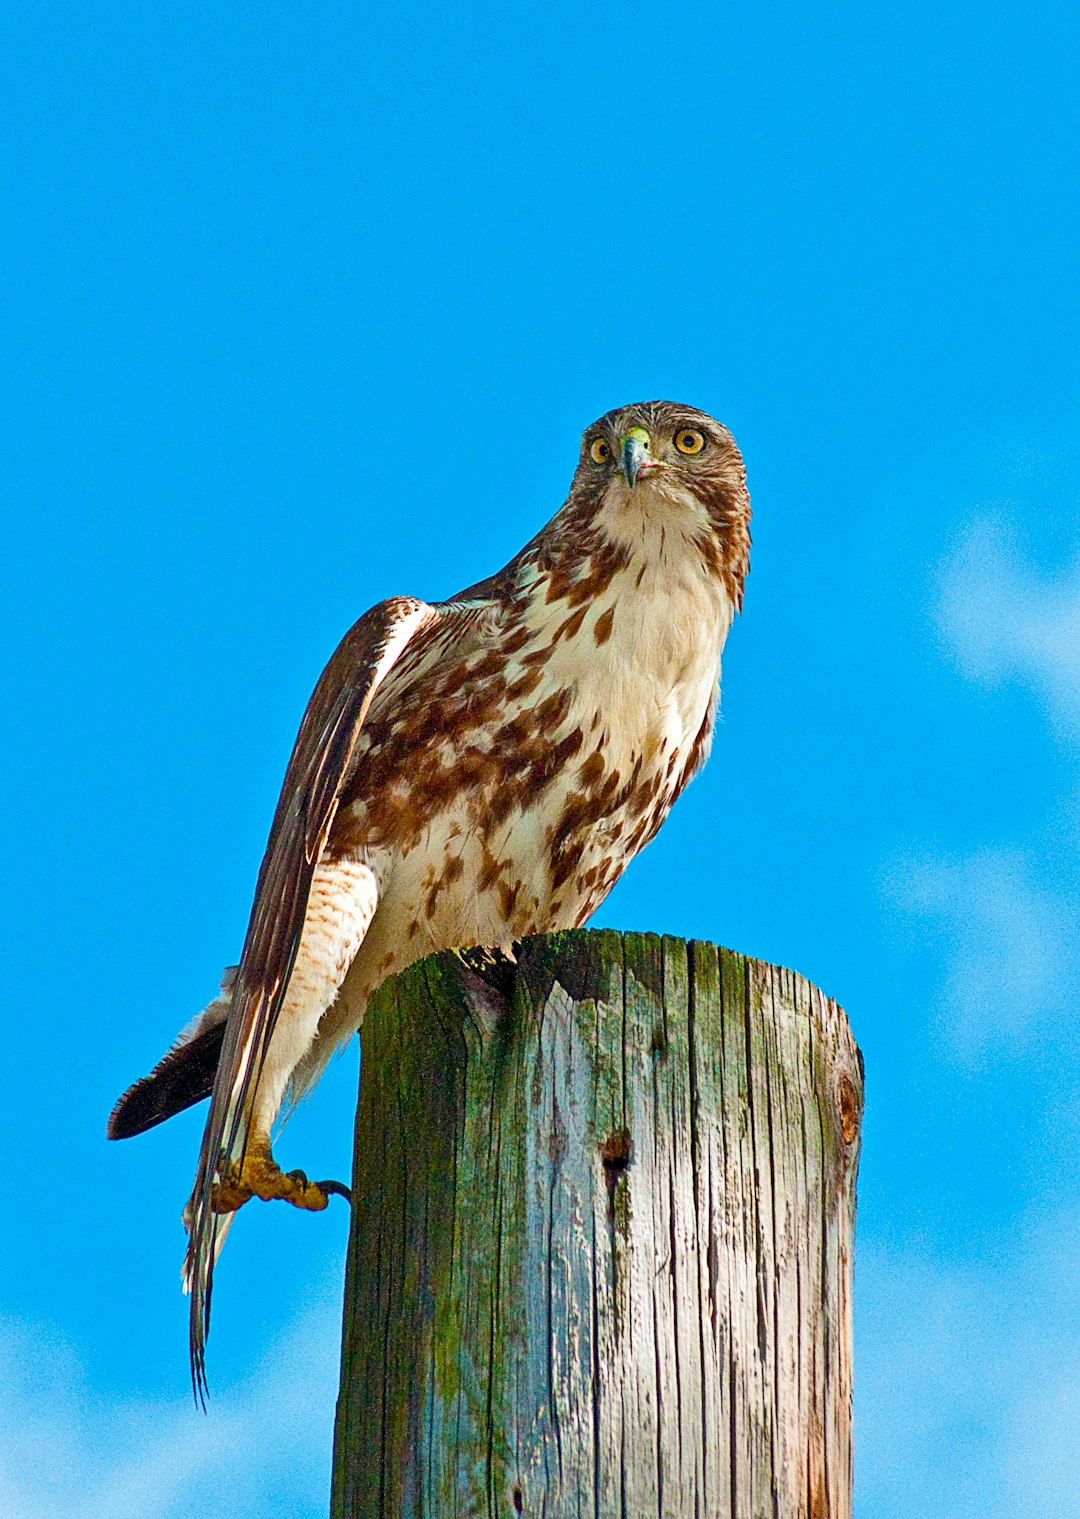  white and brown owl on wooden surface hawk